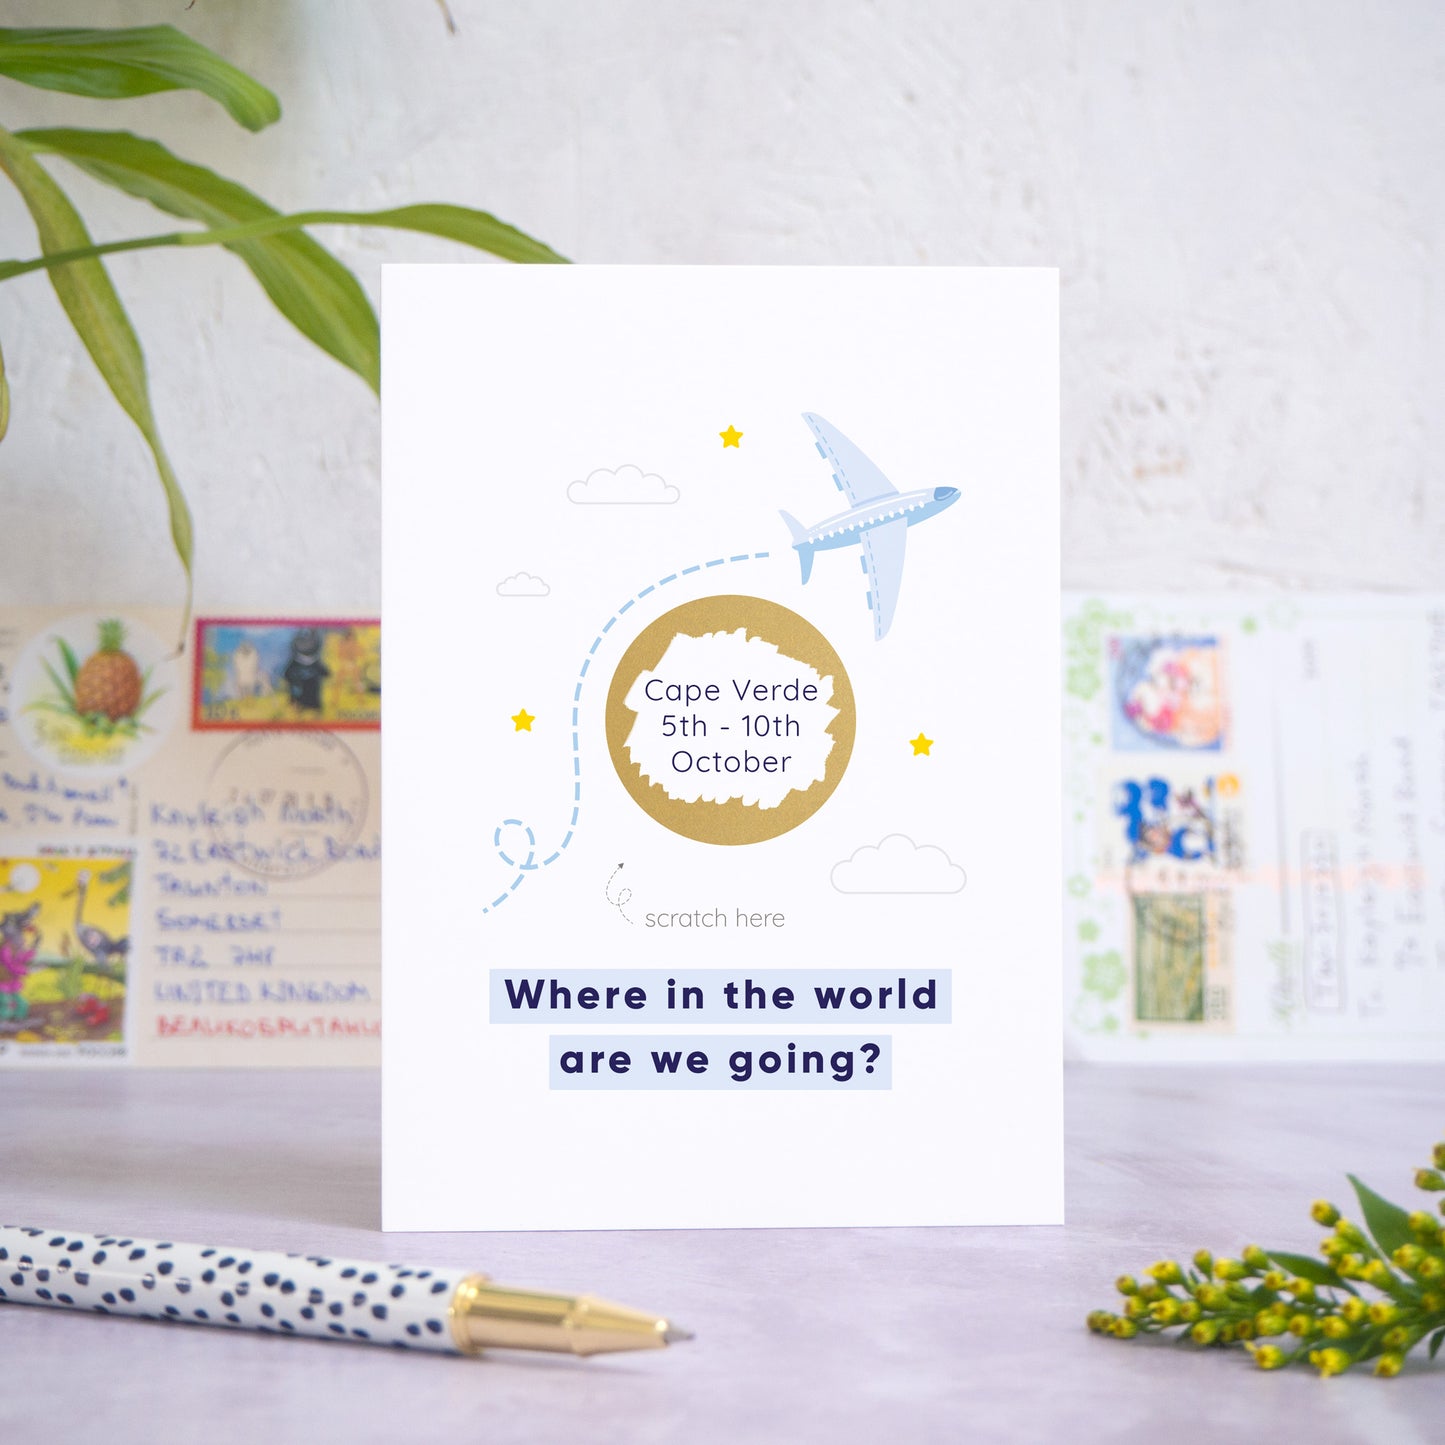 A holiday reveal scratch card featuring a plane flying over the gold scratch panel. The gold panel has been scratched off to reveal the holiday destination. Beneath the plane and scratch panel the text reads: “where in the world are we going”. The card is standing on a grey surface with postcards in the background and a pen and foliage in the foreground. This is the blue colour palette.